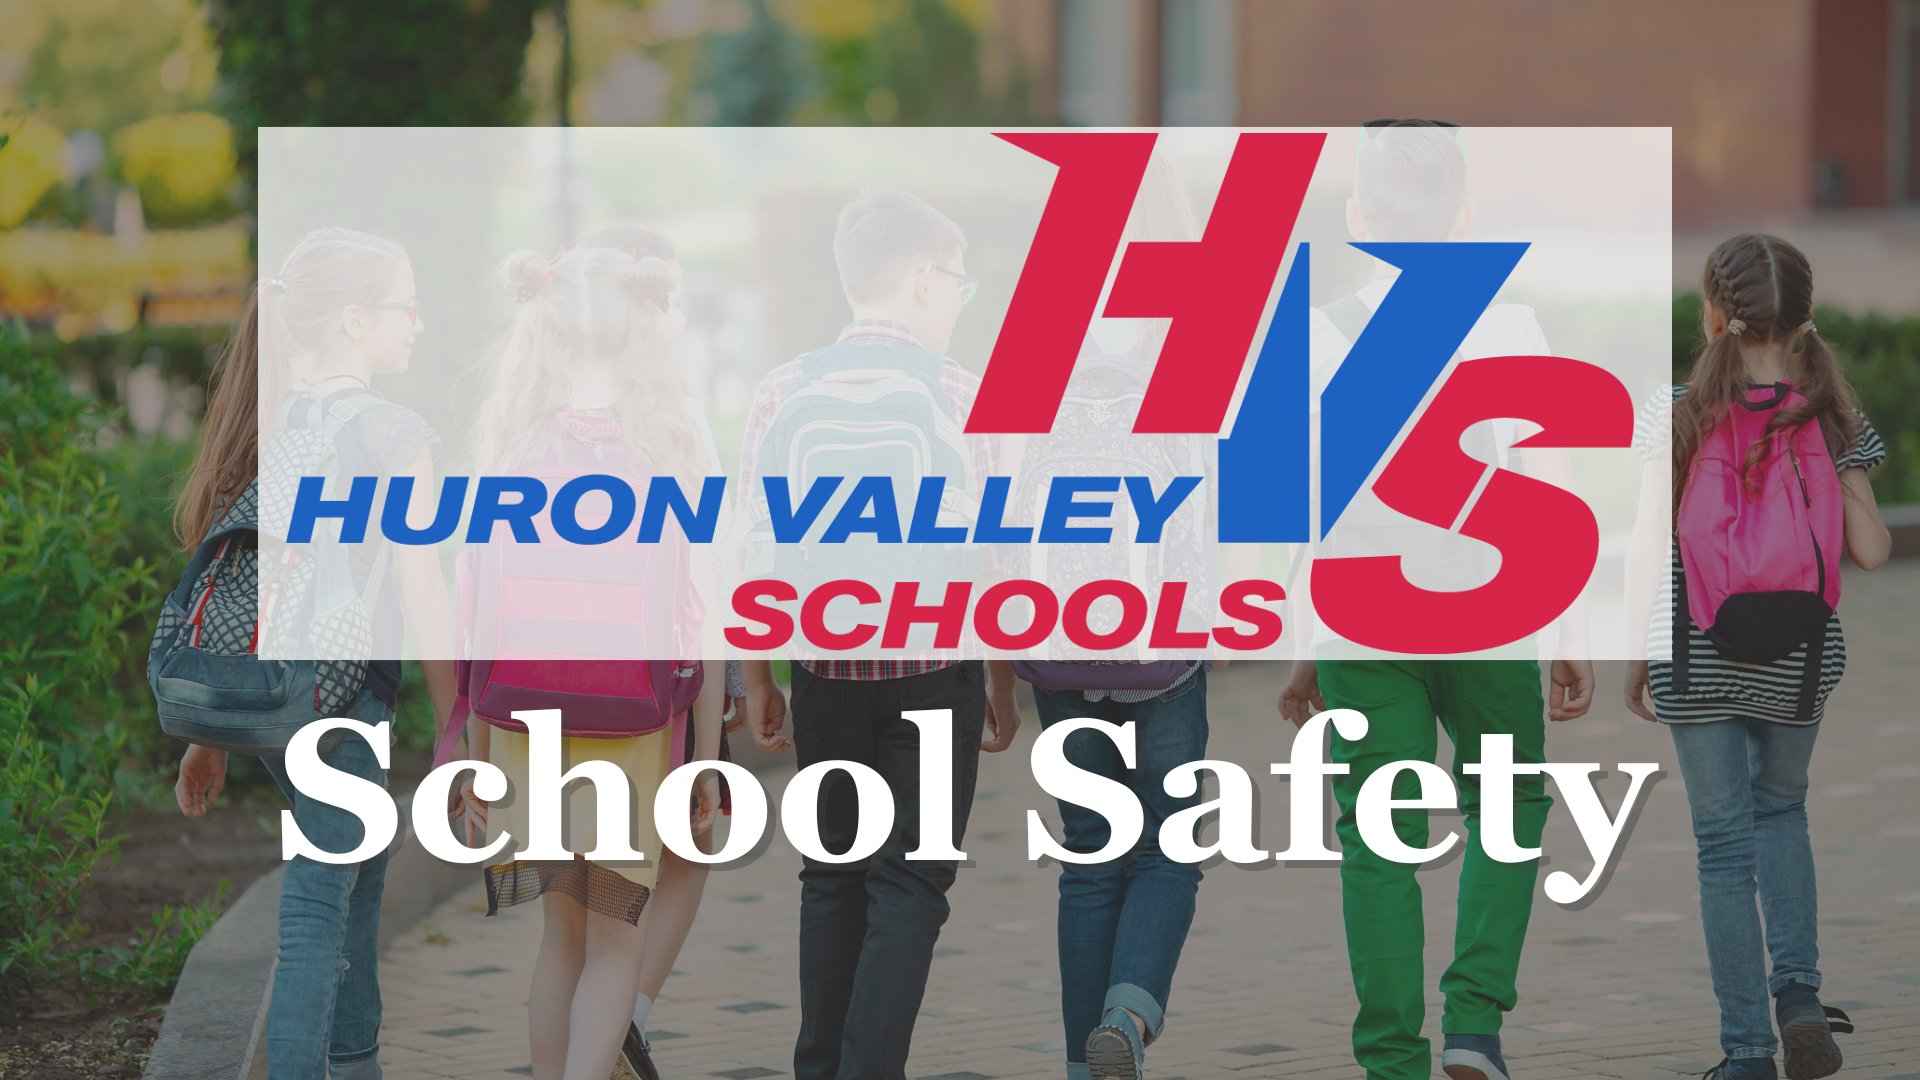 school safety image